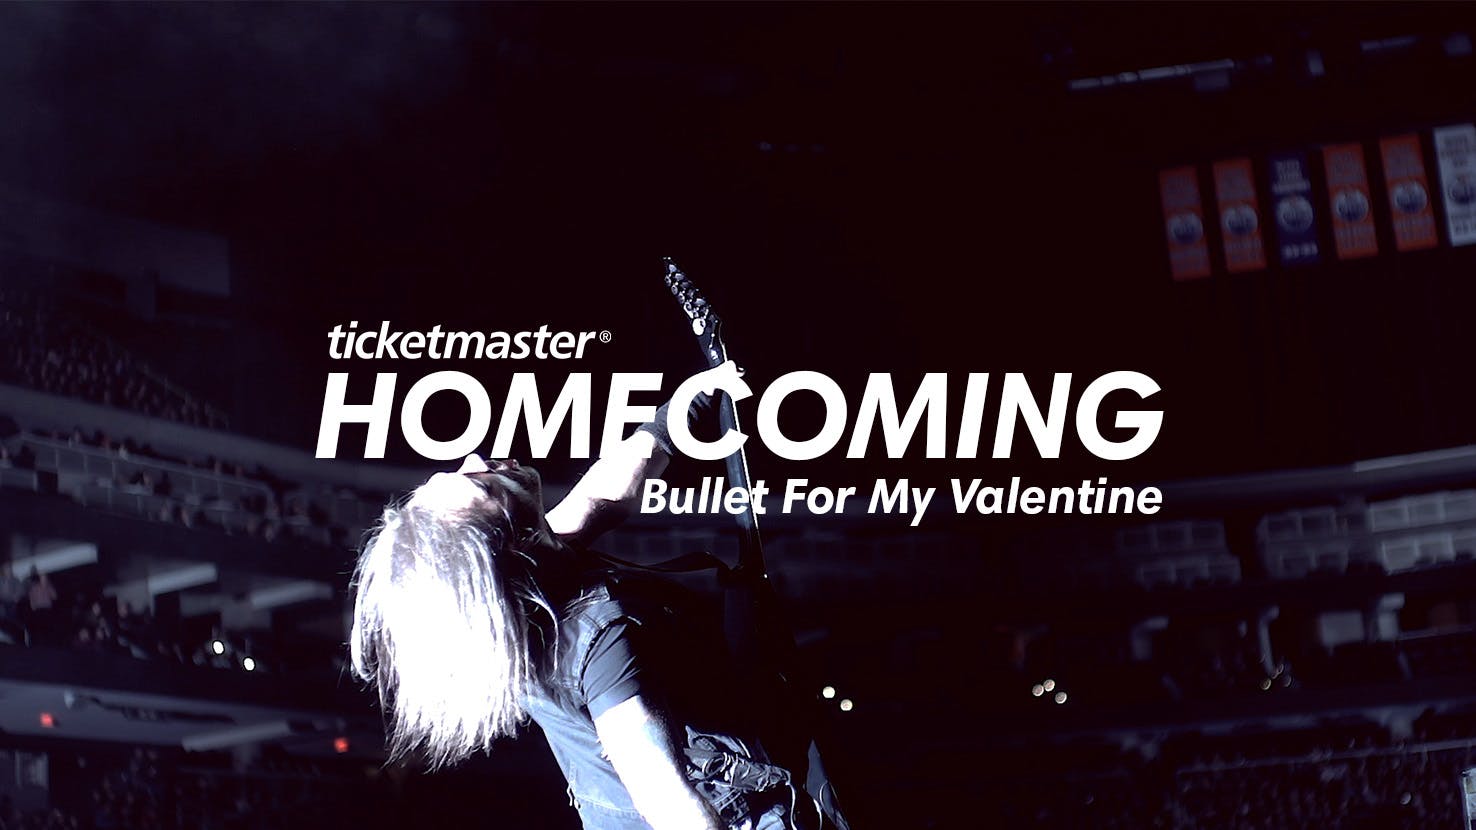 Exclusive: Bullet For My Valentine Return To Cardiff For Ticketmaster's Homecoming Video Series